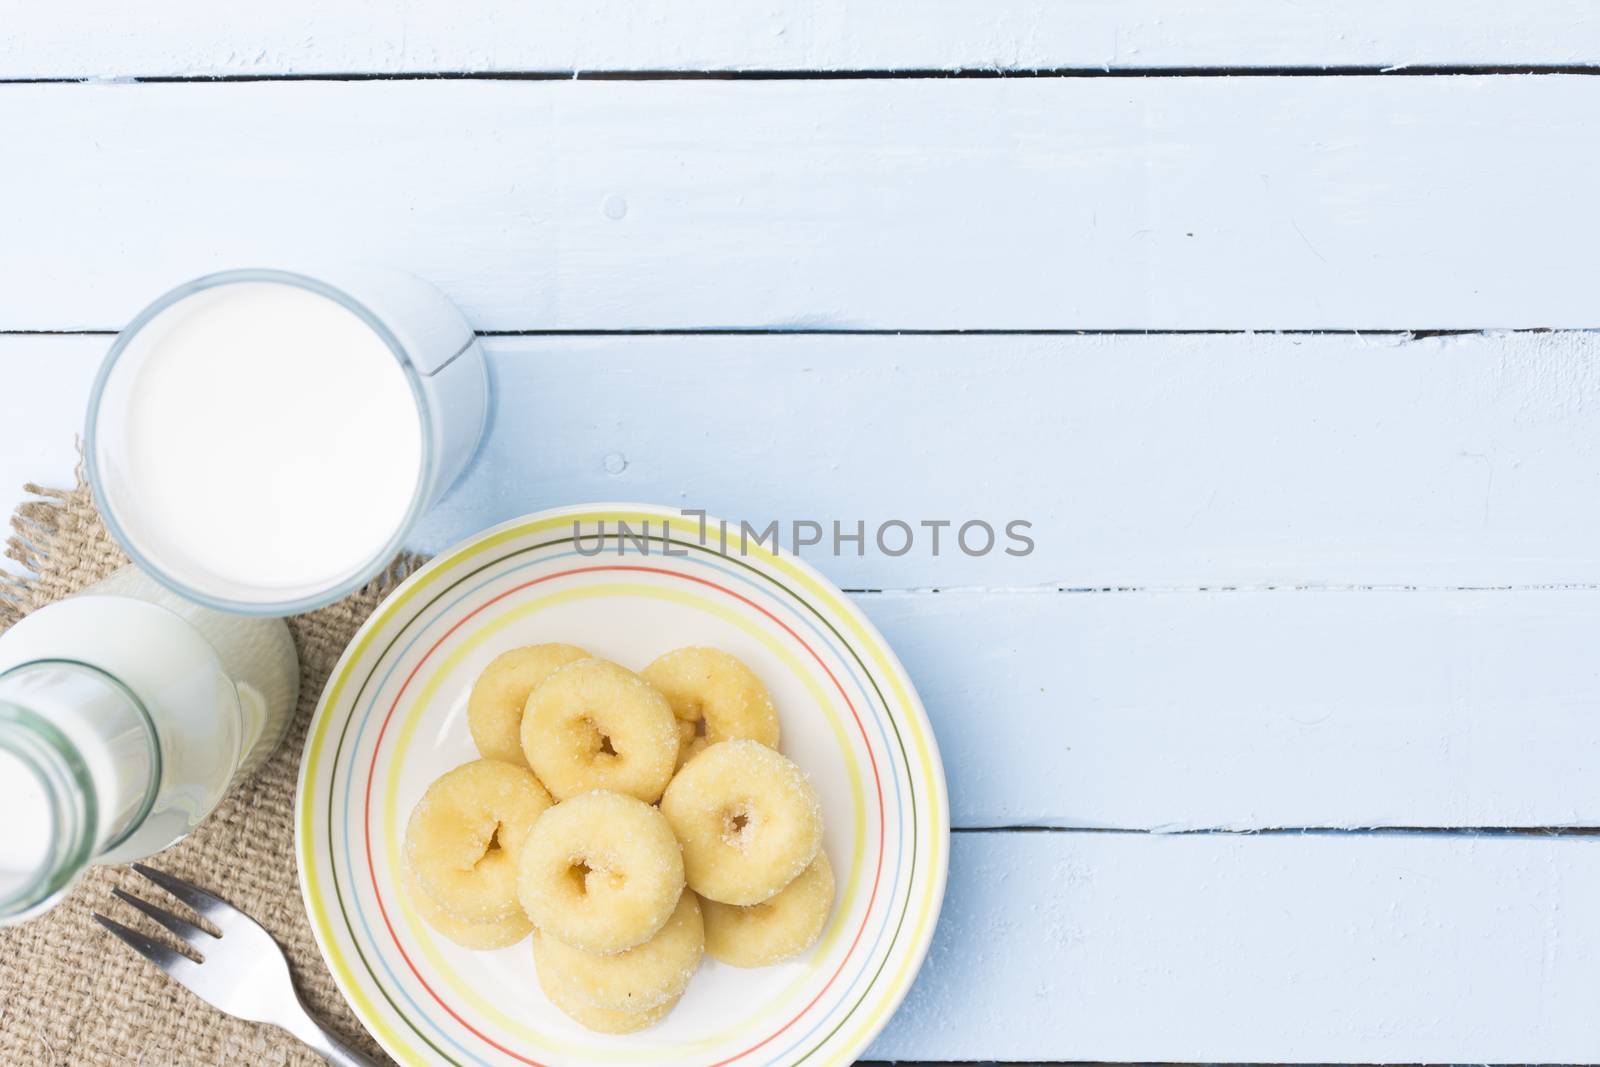 Donut dessert and milk bottle and milk glass  on wooden sky blue table.Meal or breakfast hi-vitamin and calcium.141